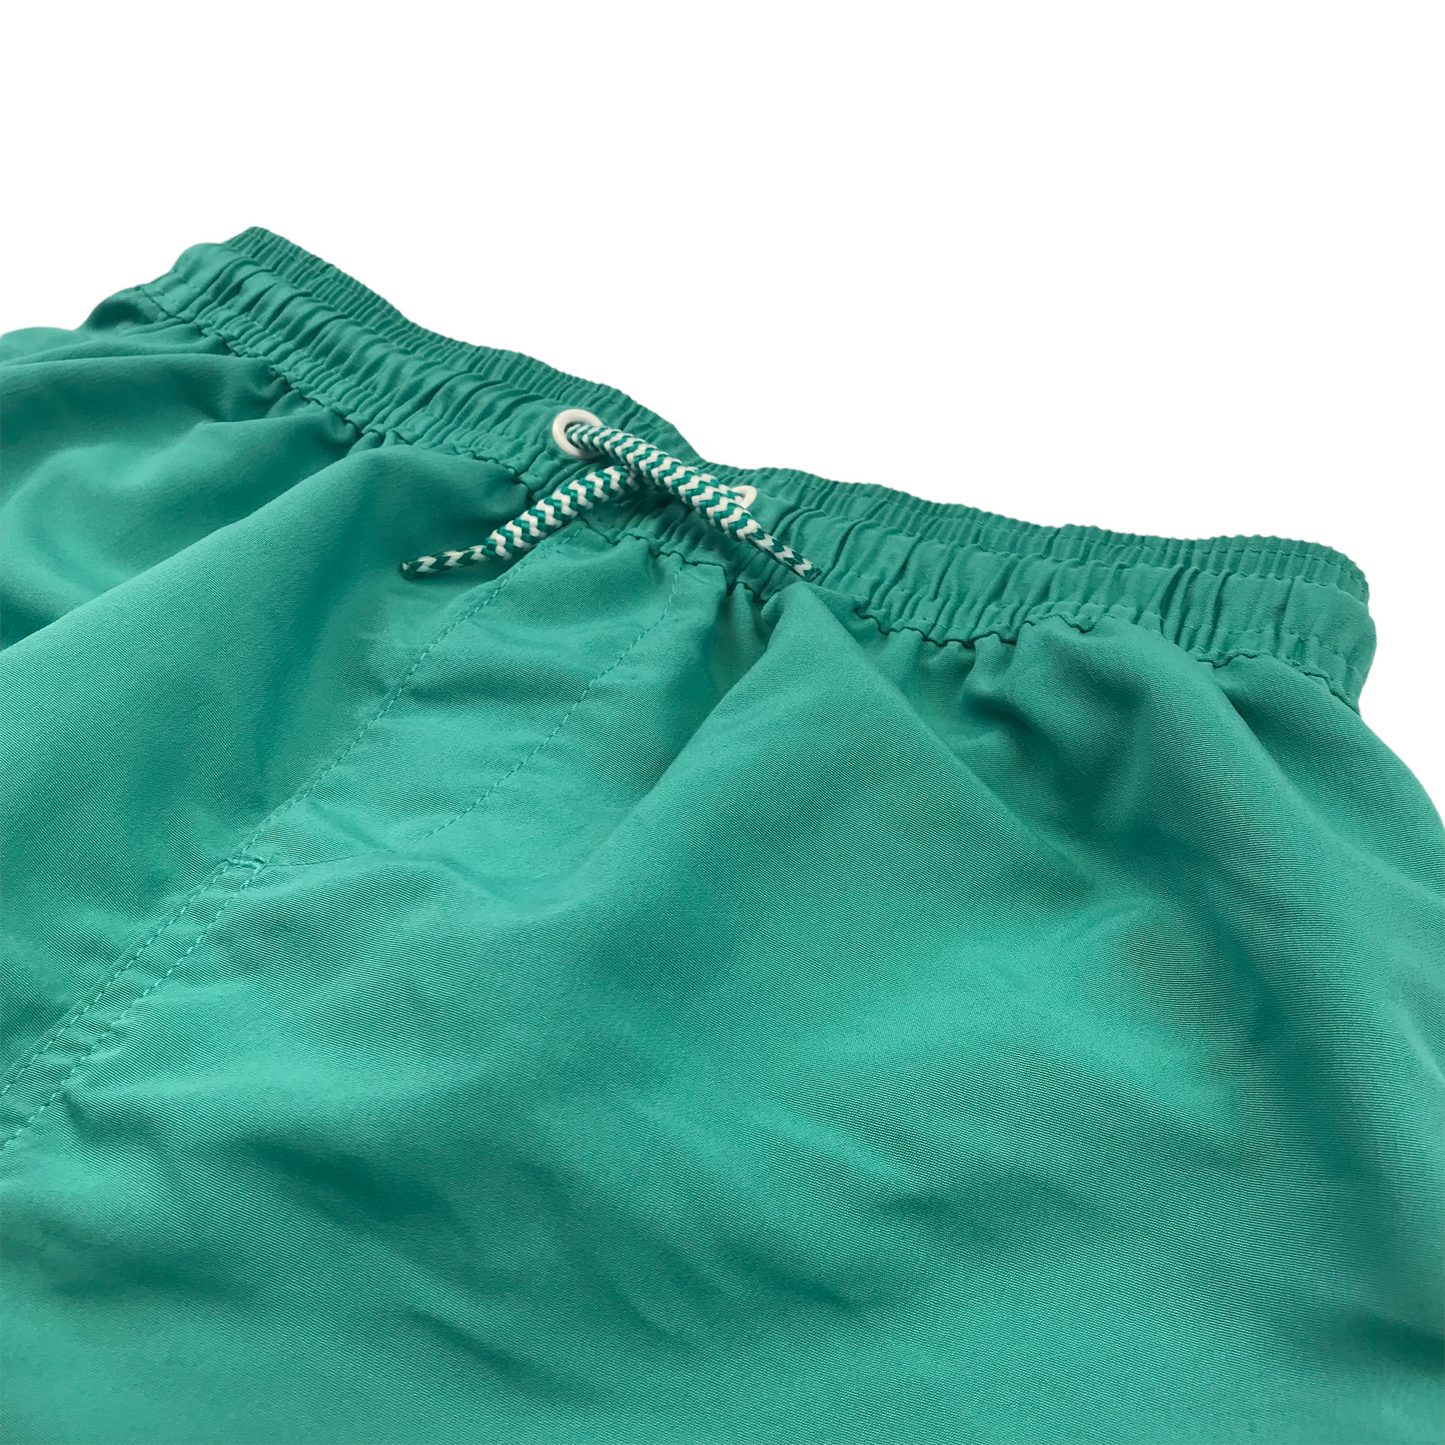 Cool Vibes Turquoise Swim Trunks Age 10